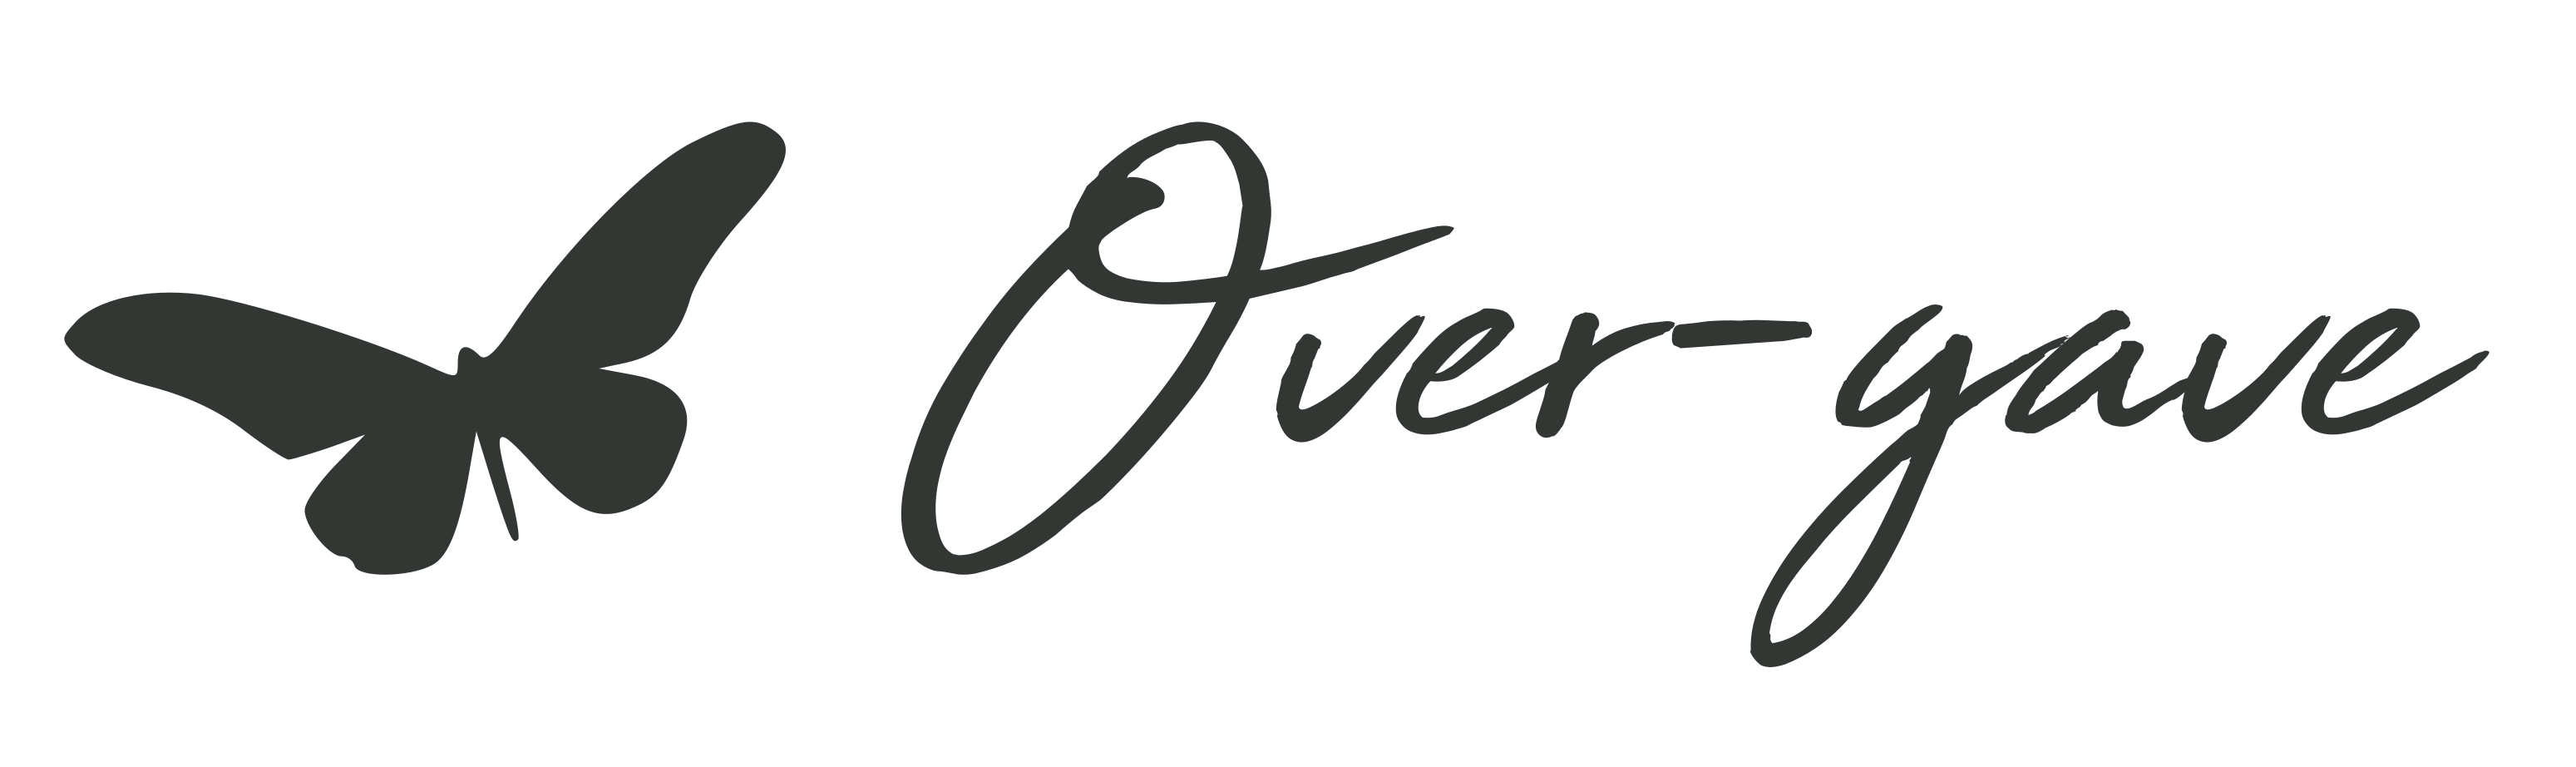 Over-gave.nl